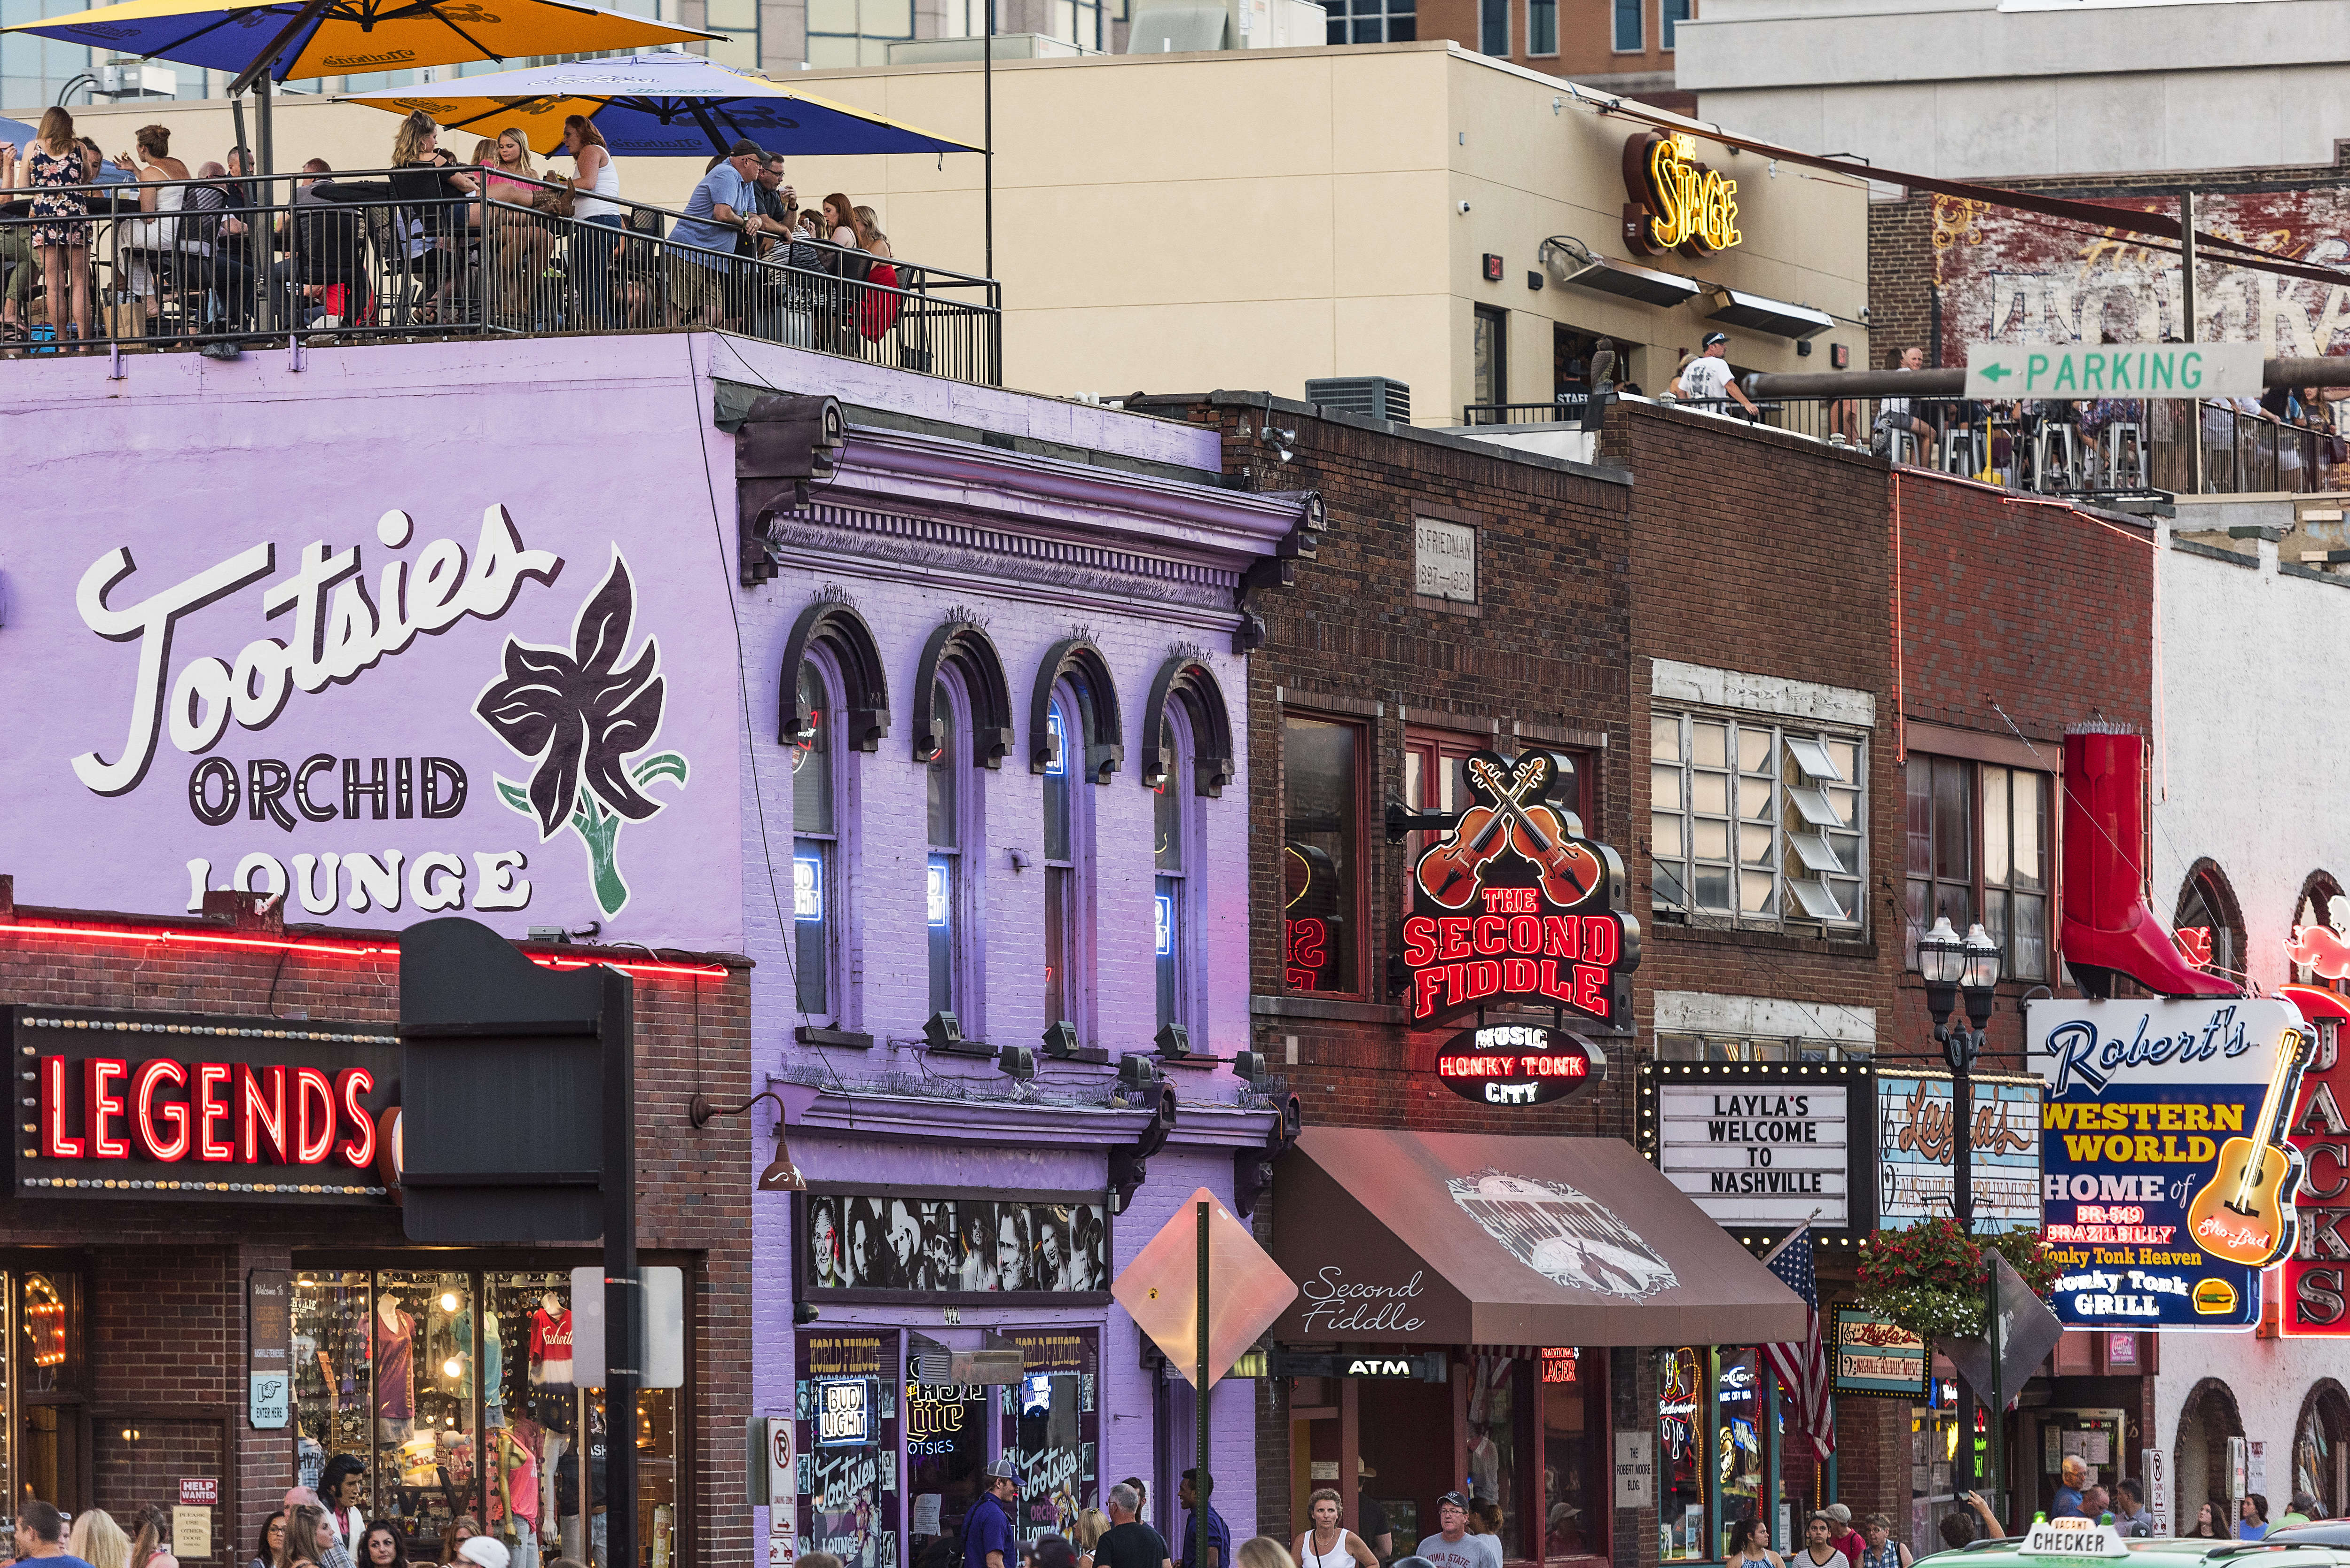 The exterior of several buildings on Broadway in Nashville, including a purple one with Tootsies Orchid Lounge painted on the side, one with a neon Legends sign out front, and one with a neon Second Fiddle sign out front.